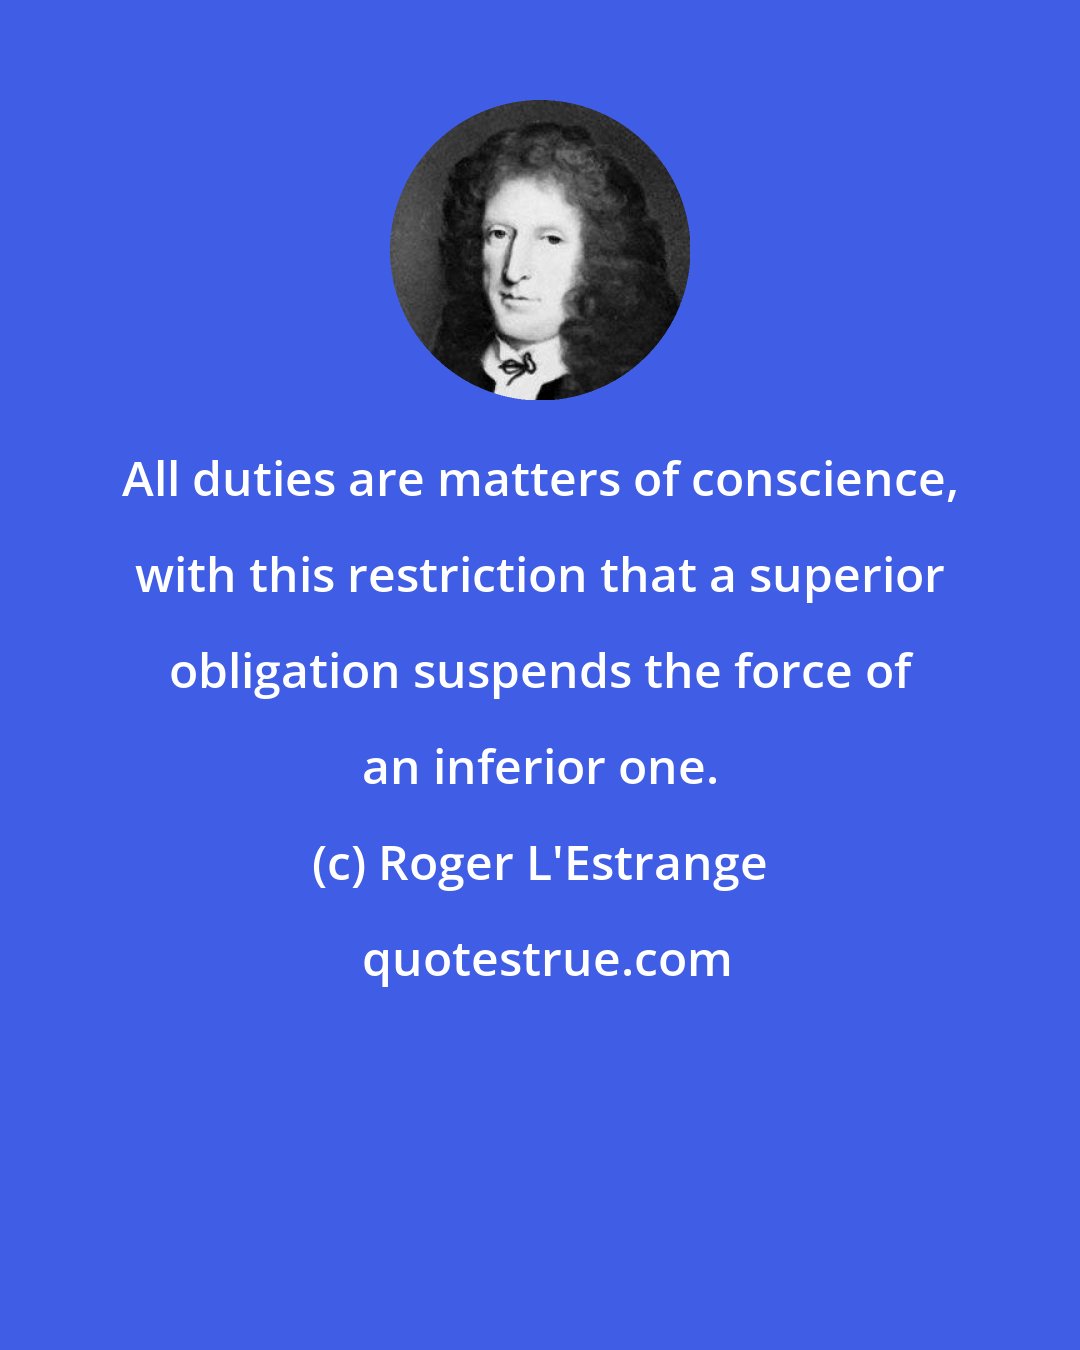 Roger L'Estrange: All duties are matters of conscience, with this restriction that a superior obligation suspends the force of an inferior one.